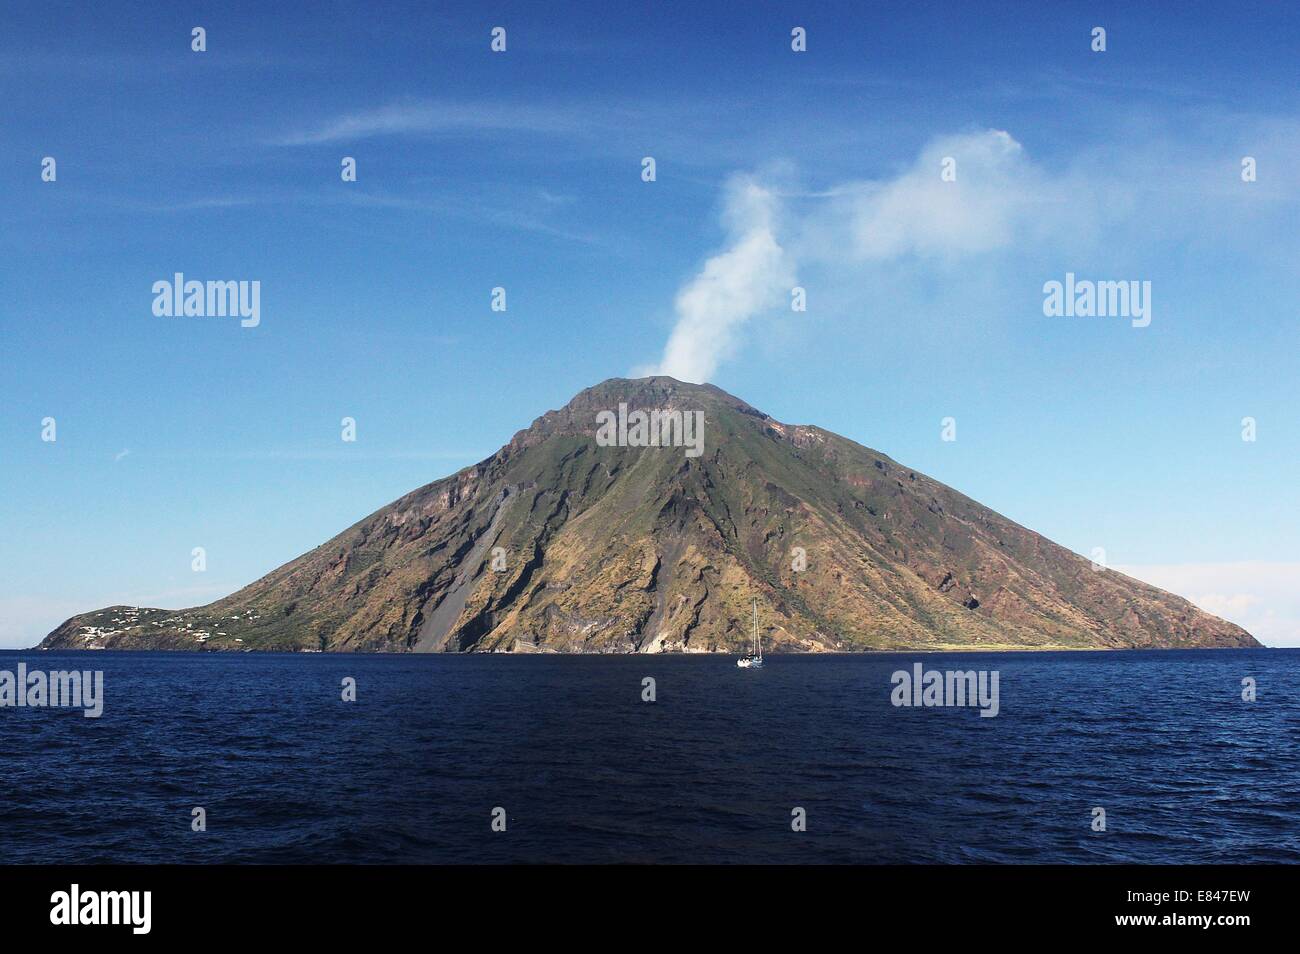 Mount Stromboli off the coast of Sicily with a volcanic plume coming from the top. Stock Photo